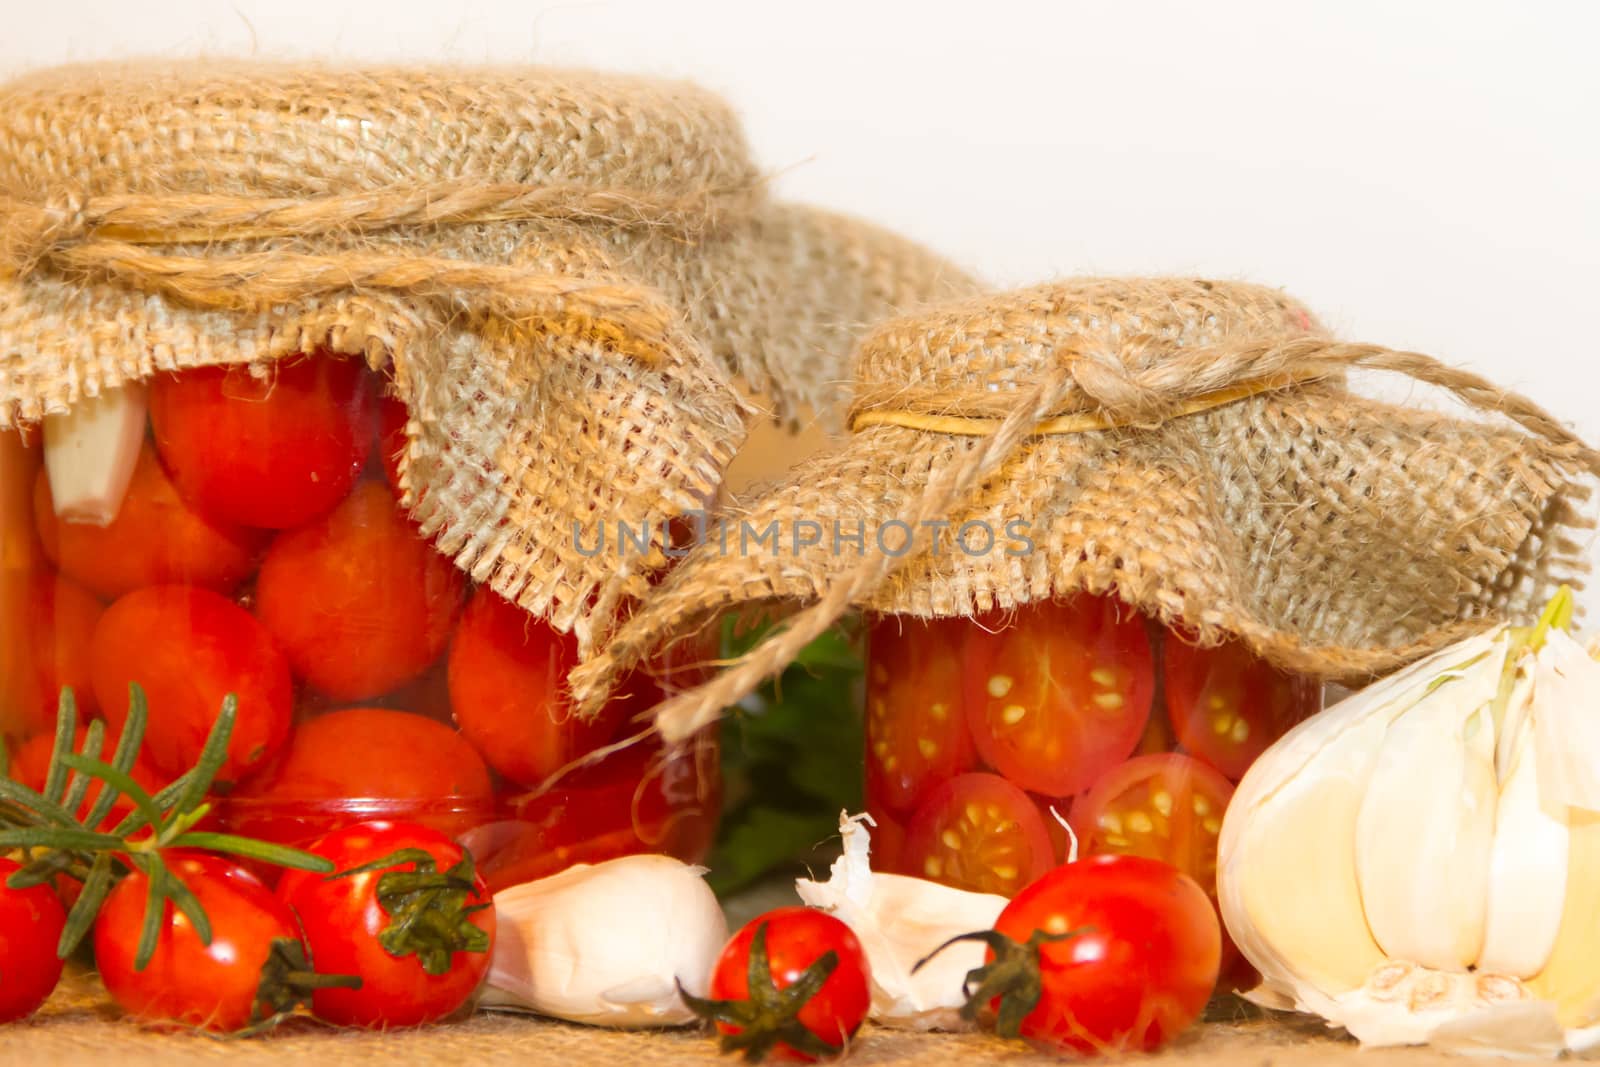 pickled cherry tomatoes in vinegar with garlic and spices